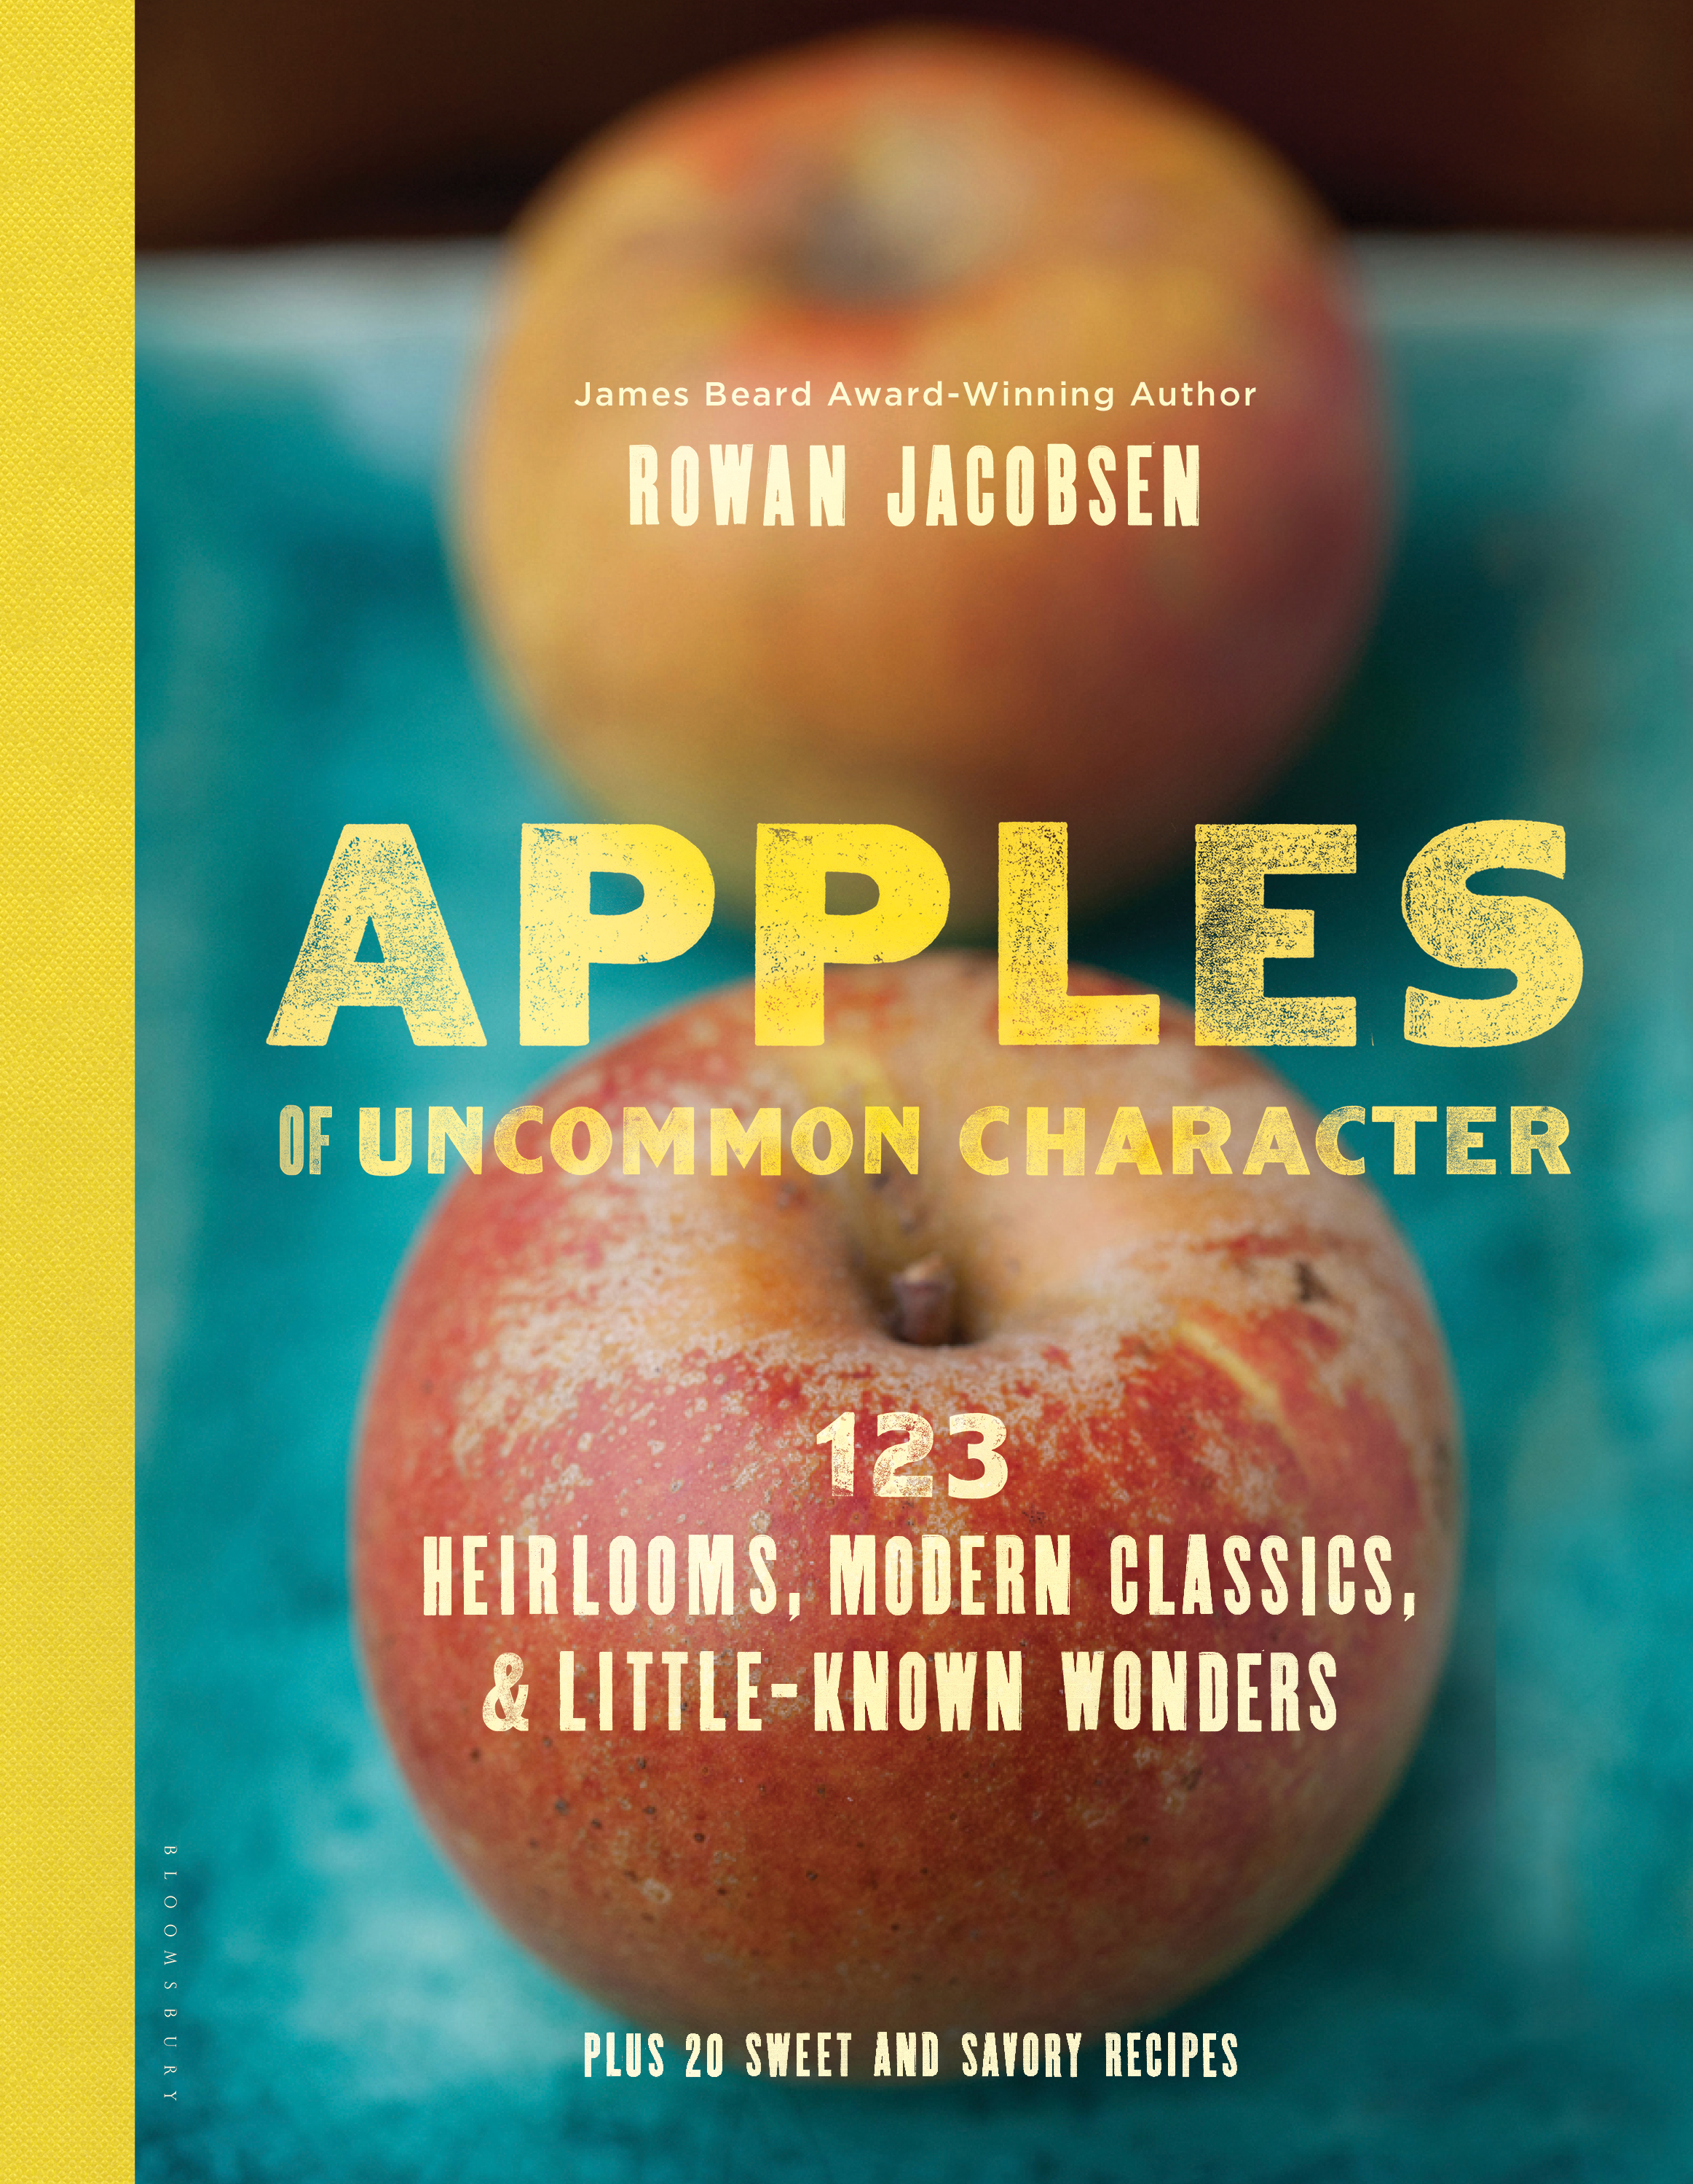 APPLES OF UNCOMMON CHARACTER